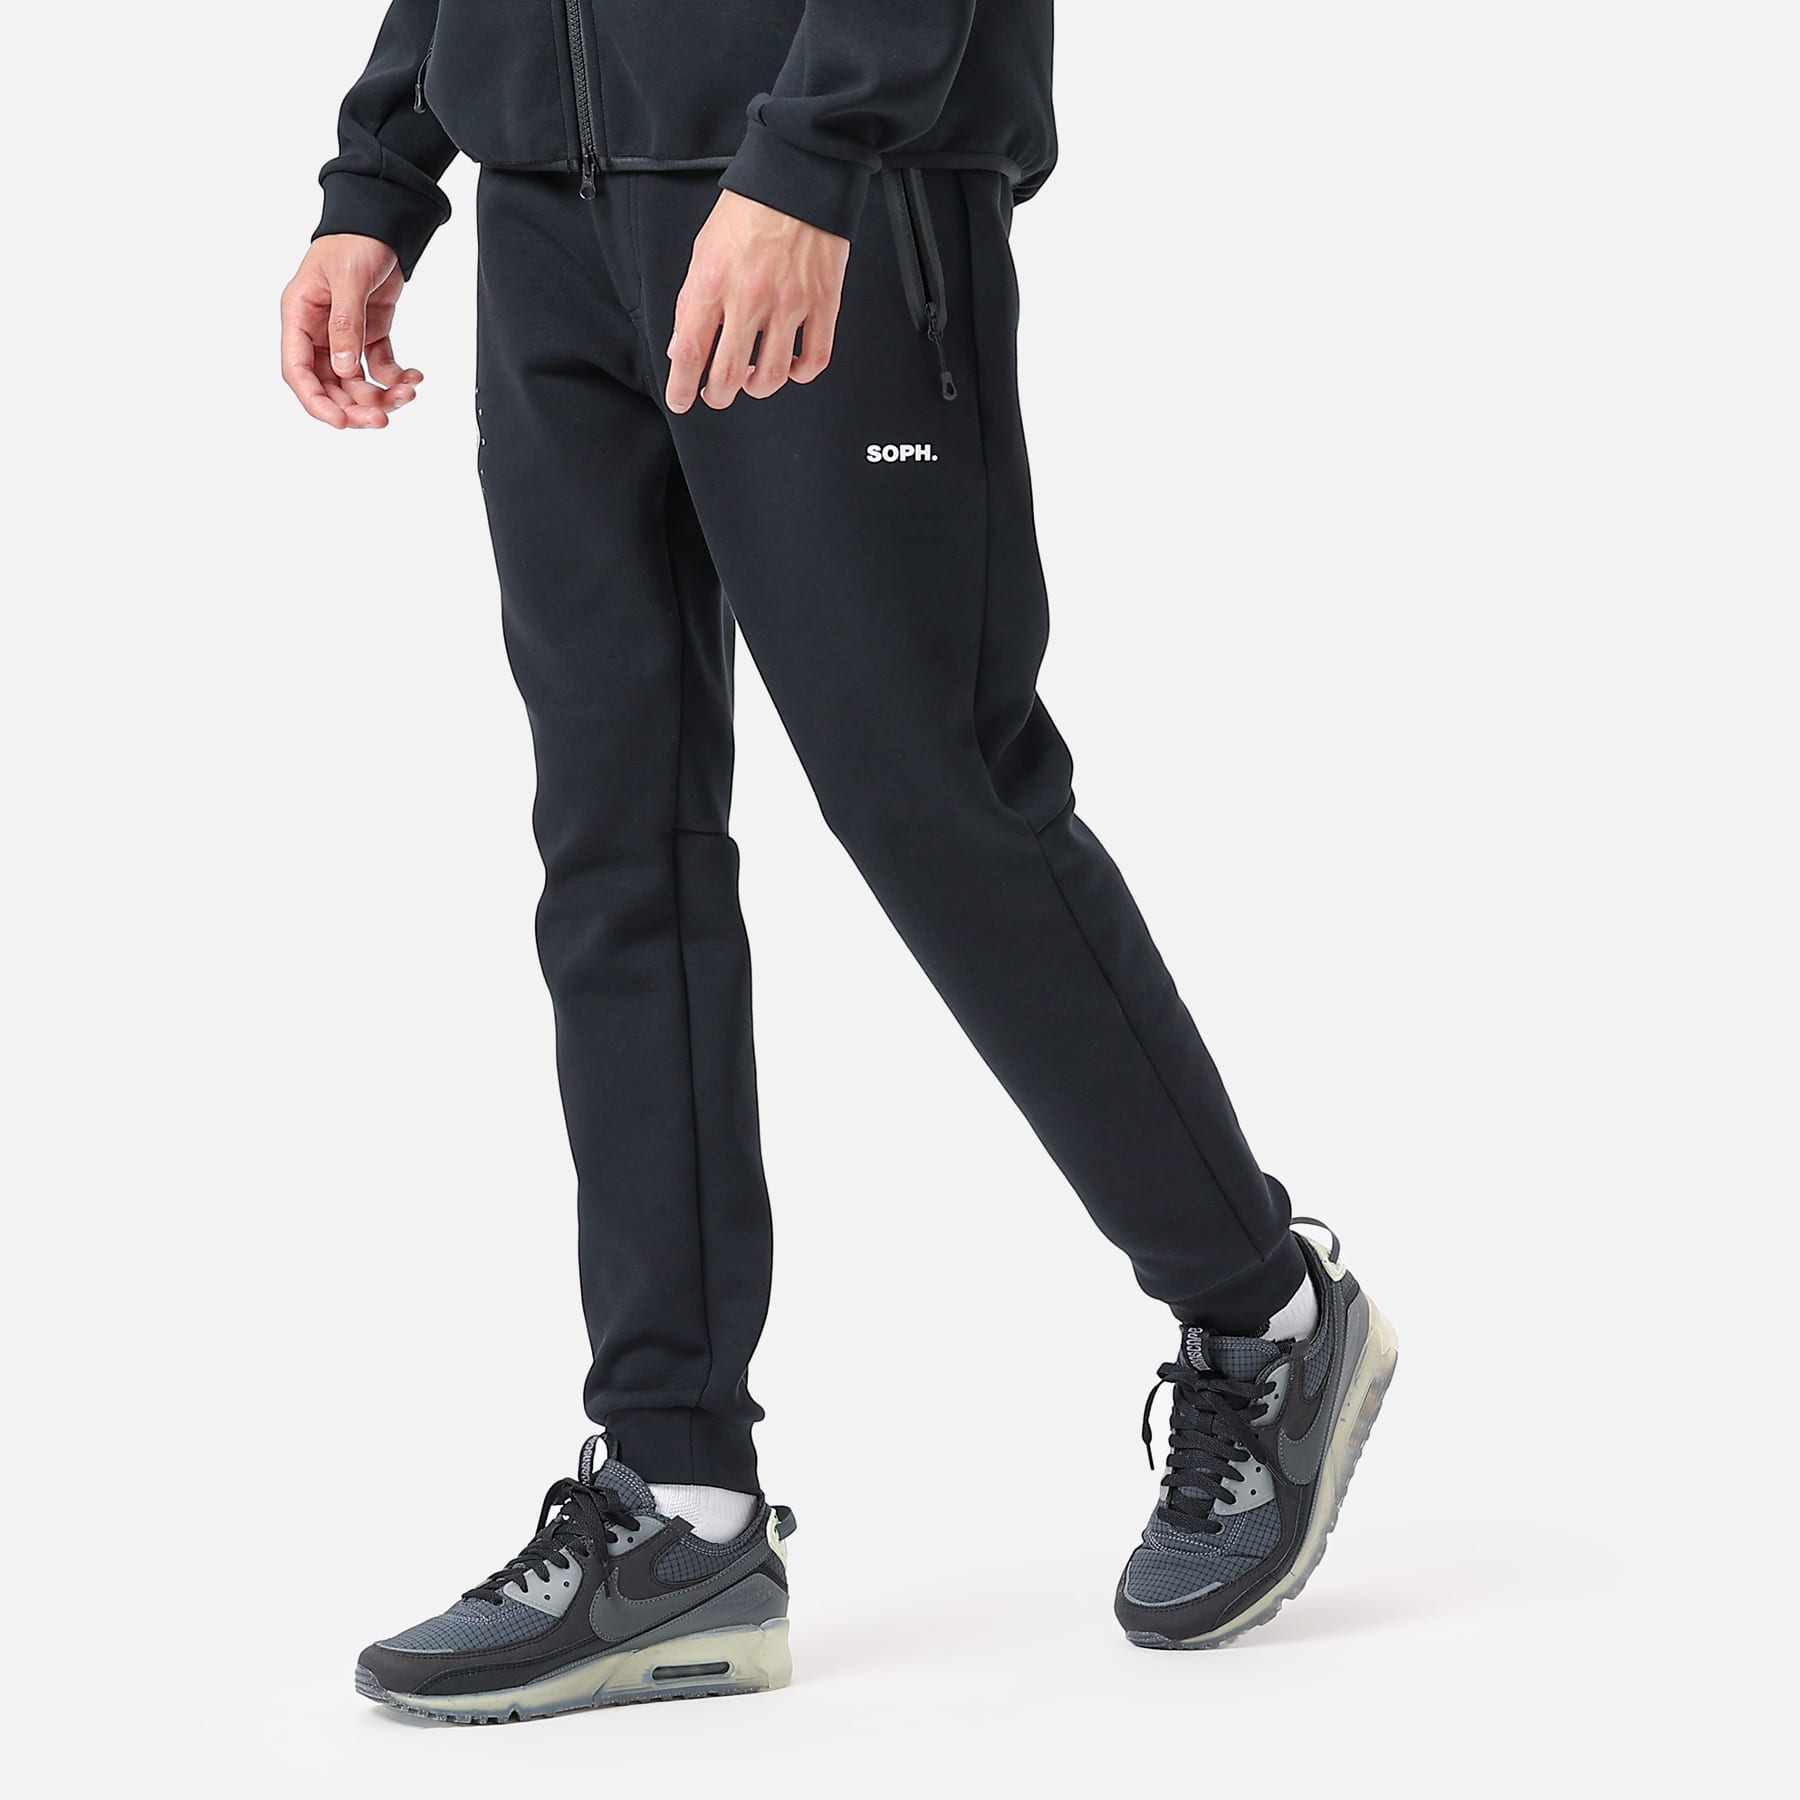 FCRB サイズS 20AW TRAINING JERSEY PANTS - その他